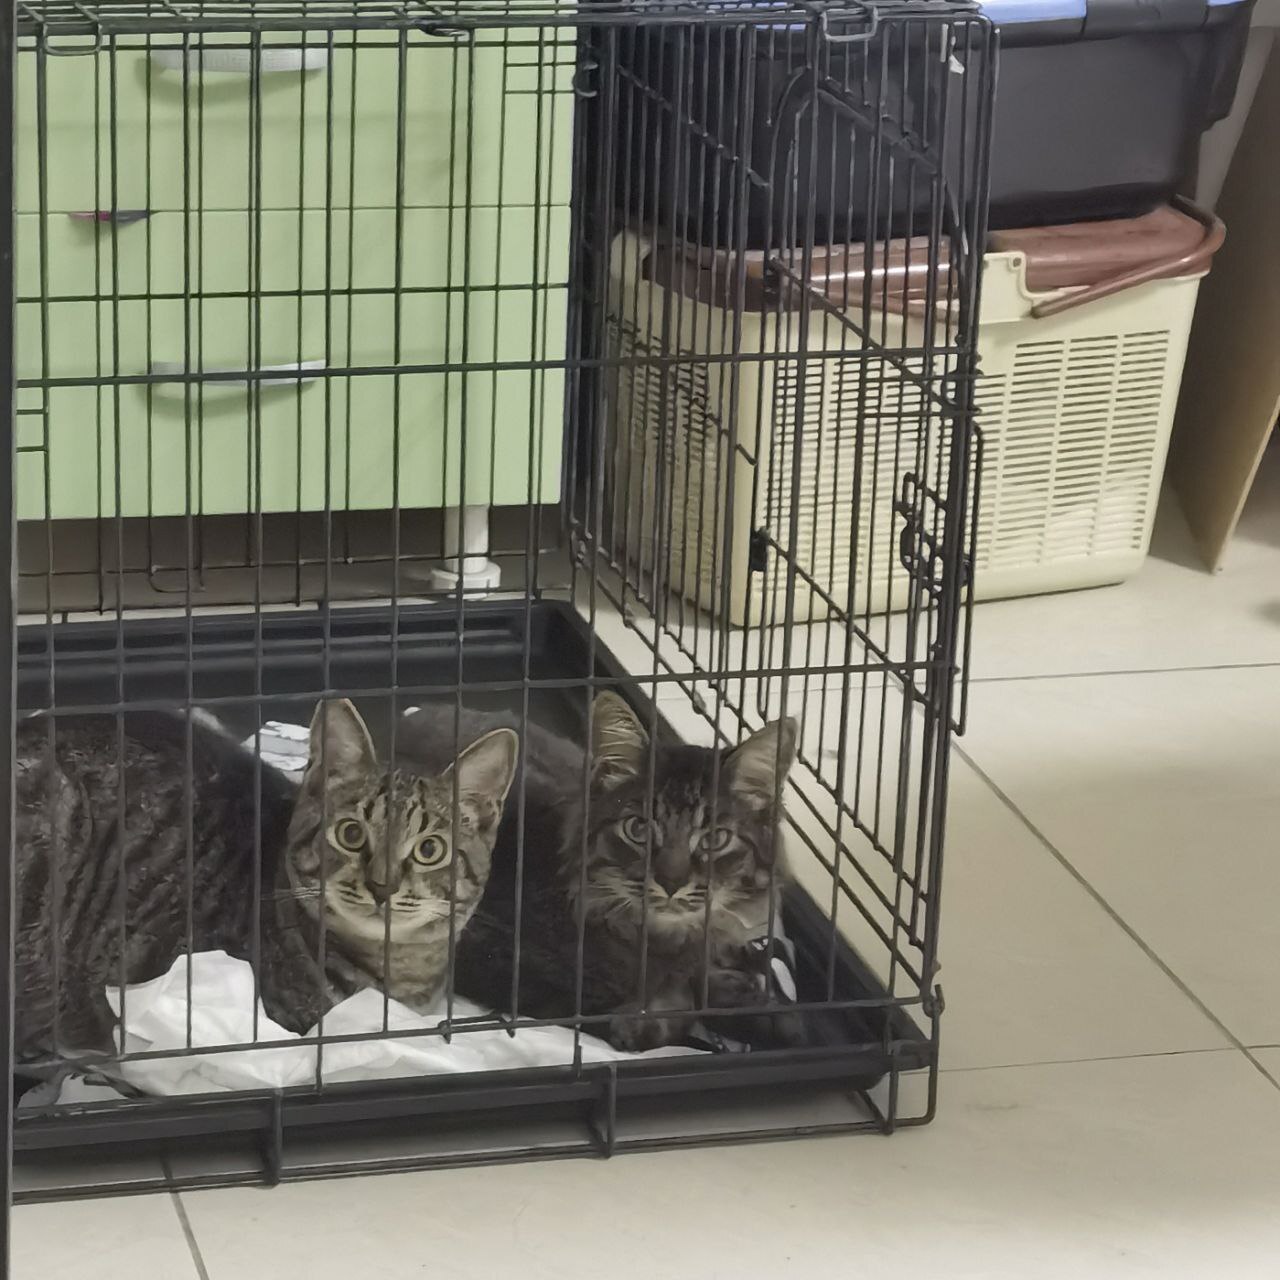 A KITTEN'S ENTIRE CHILDHOOD IS SPENT IN A CAGE... - In good hands, Pets, Kittens, Fluffy, cat, Overexposure, Cat lovers, Homeless animals, Shelter, Moscow, Moscow 24, Pet the cat, Vertical video, Longcat, Video VK, Video, Longpost